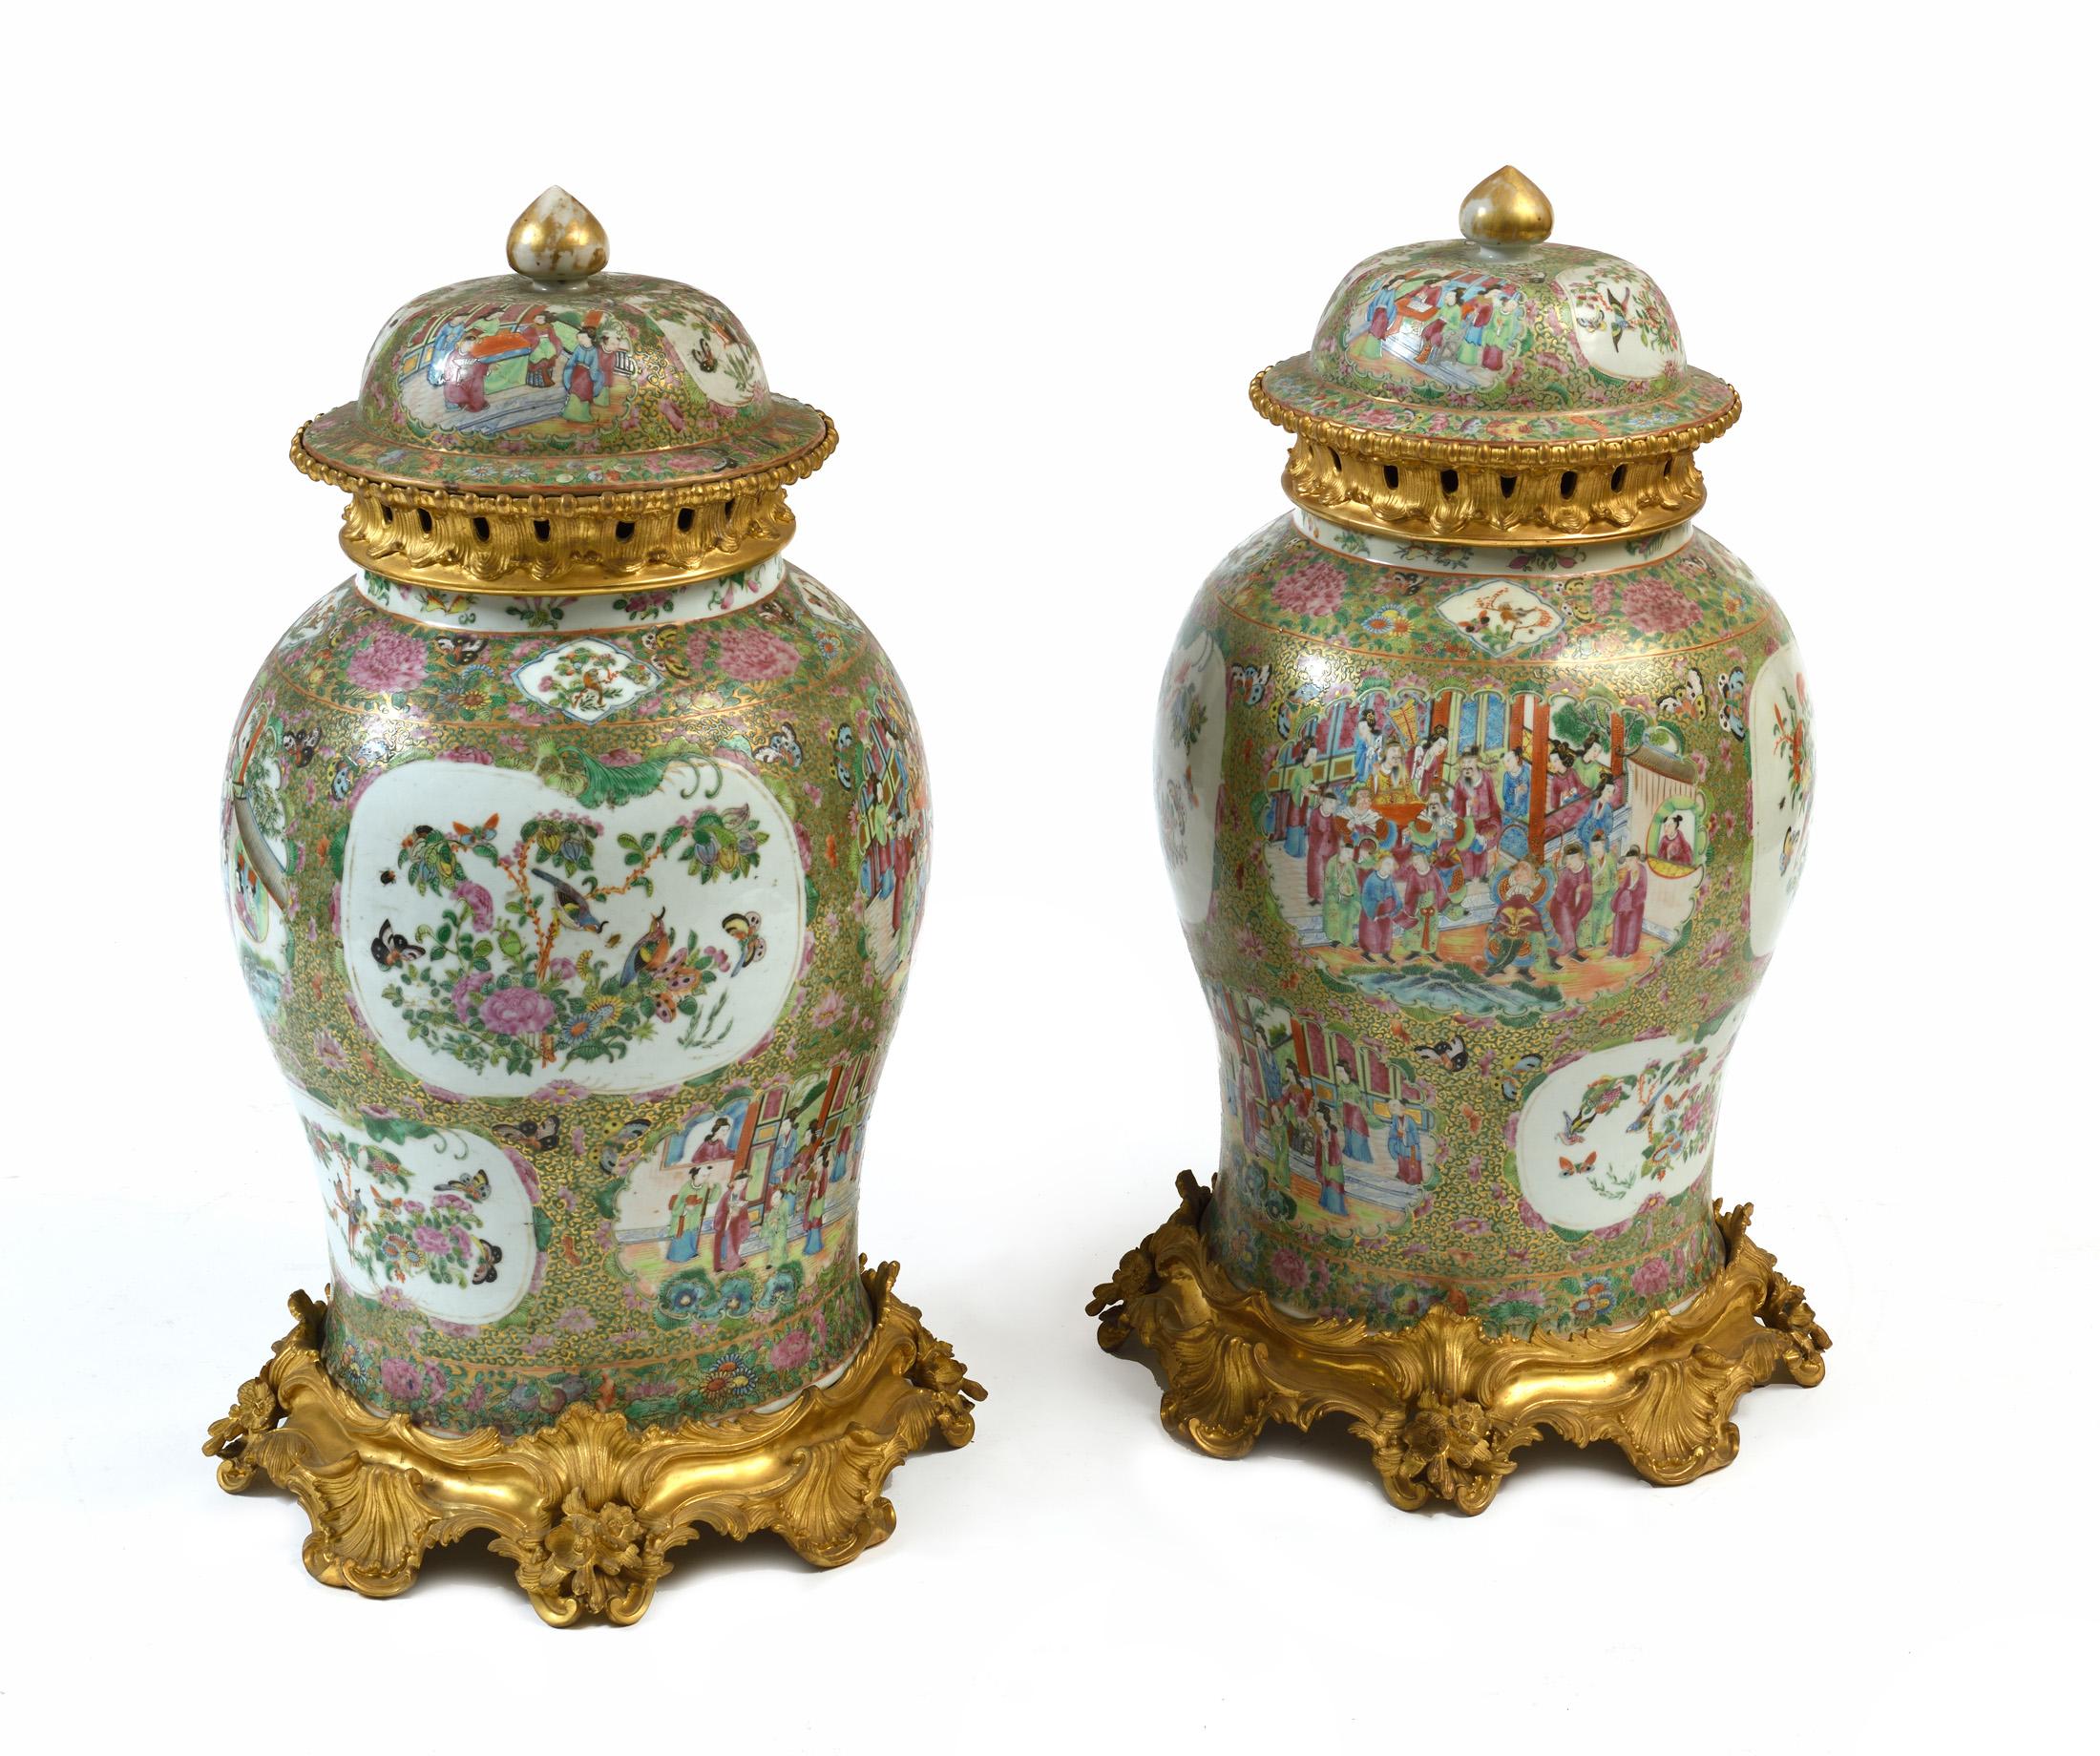 A stunning pair of vase rose medaillon canton porcelain with  ormolu bronze in the base and the top of the vases, probably the ormolu bronze is later than the porcelain around  1890  /1900